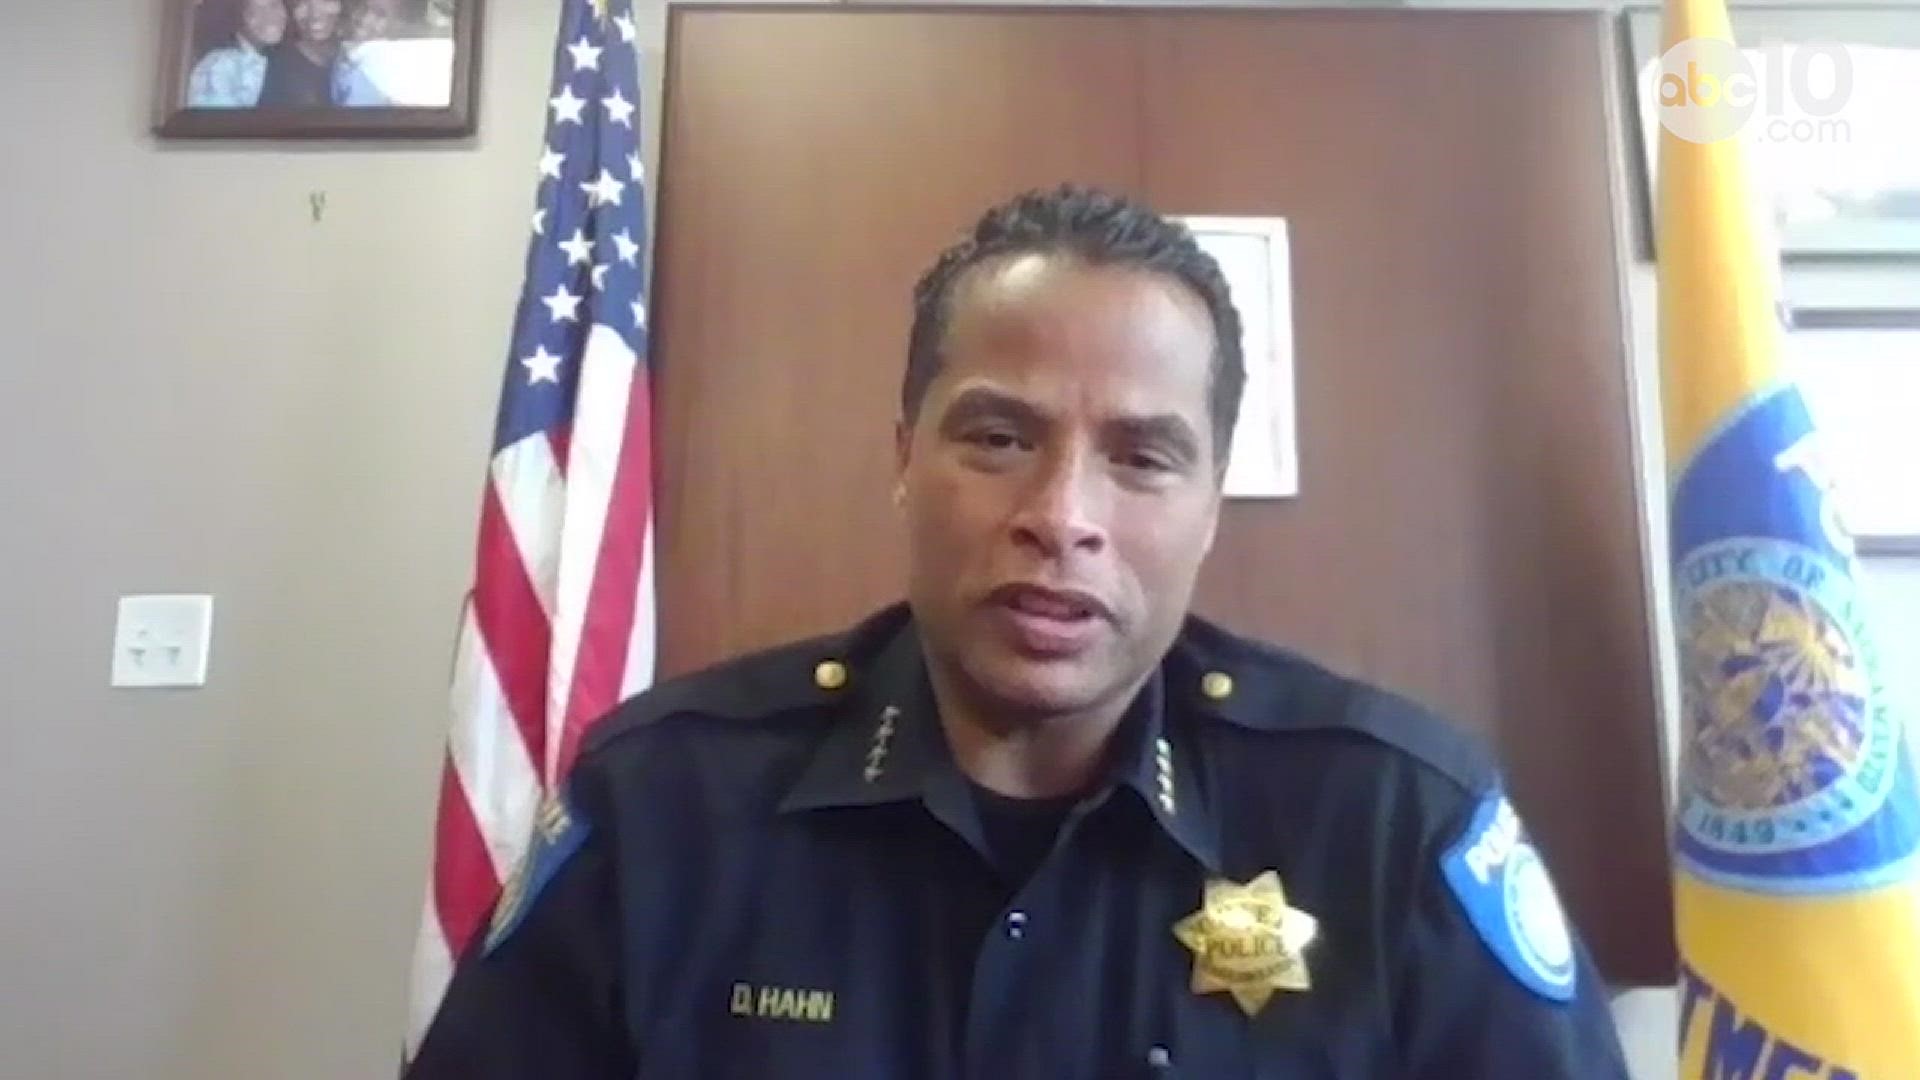 After two days of protests for the killing of George Floyd, Police Chief Daniel Hahn shares his thoughts on the protests and the Sacramento community.